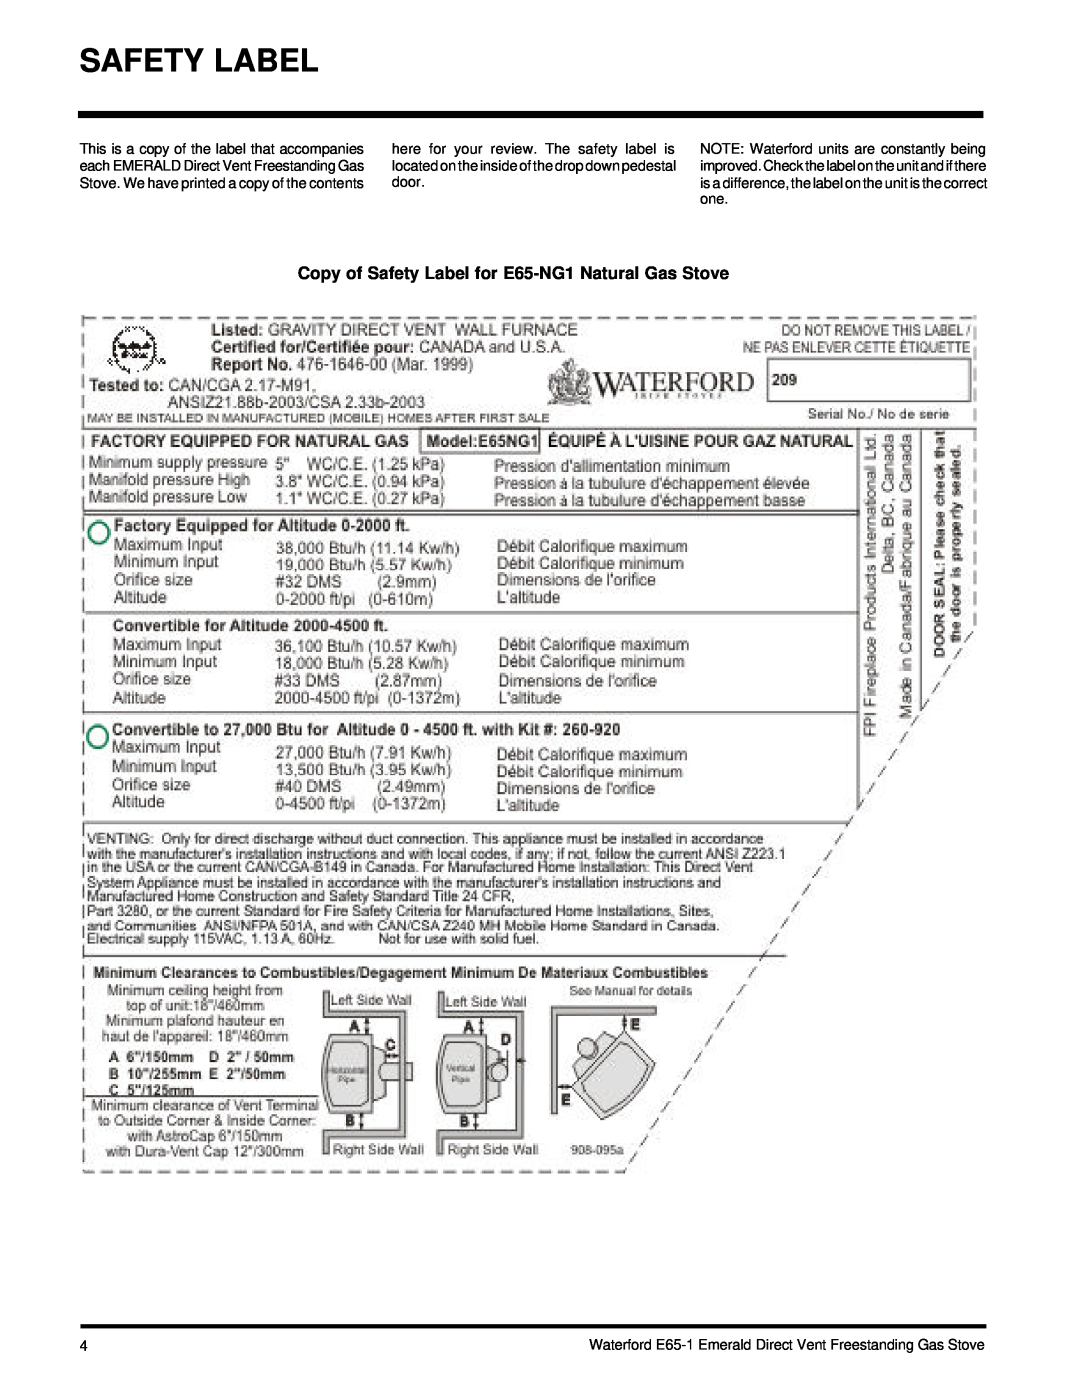 Waterford Appliances E65-LP1 installation manual Copy of Safety Label for E65-NG1Natural Gas Stove 